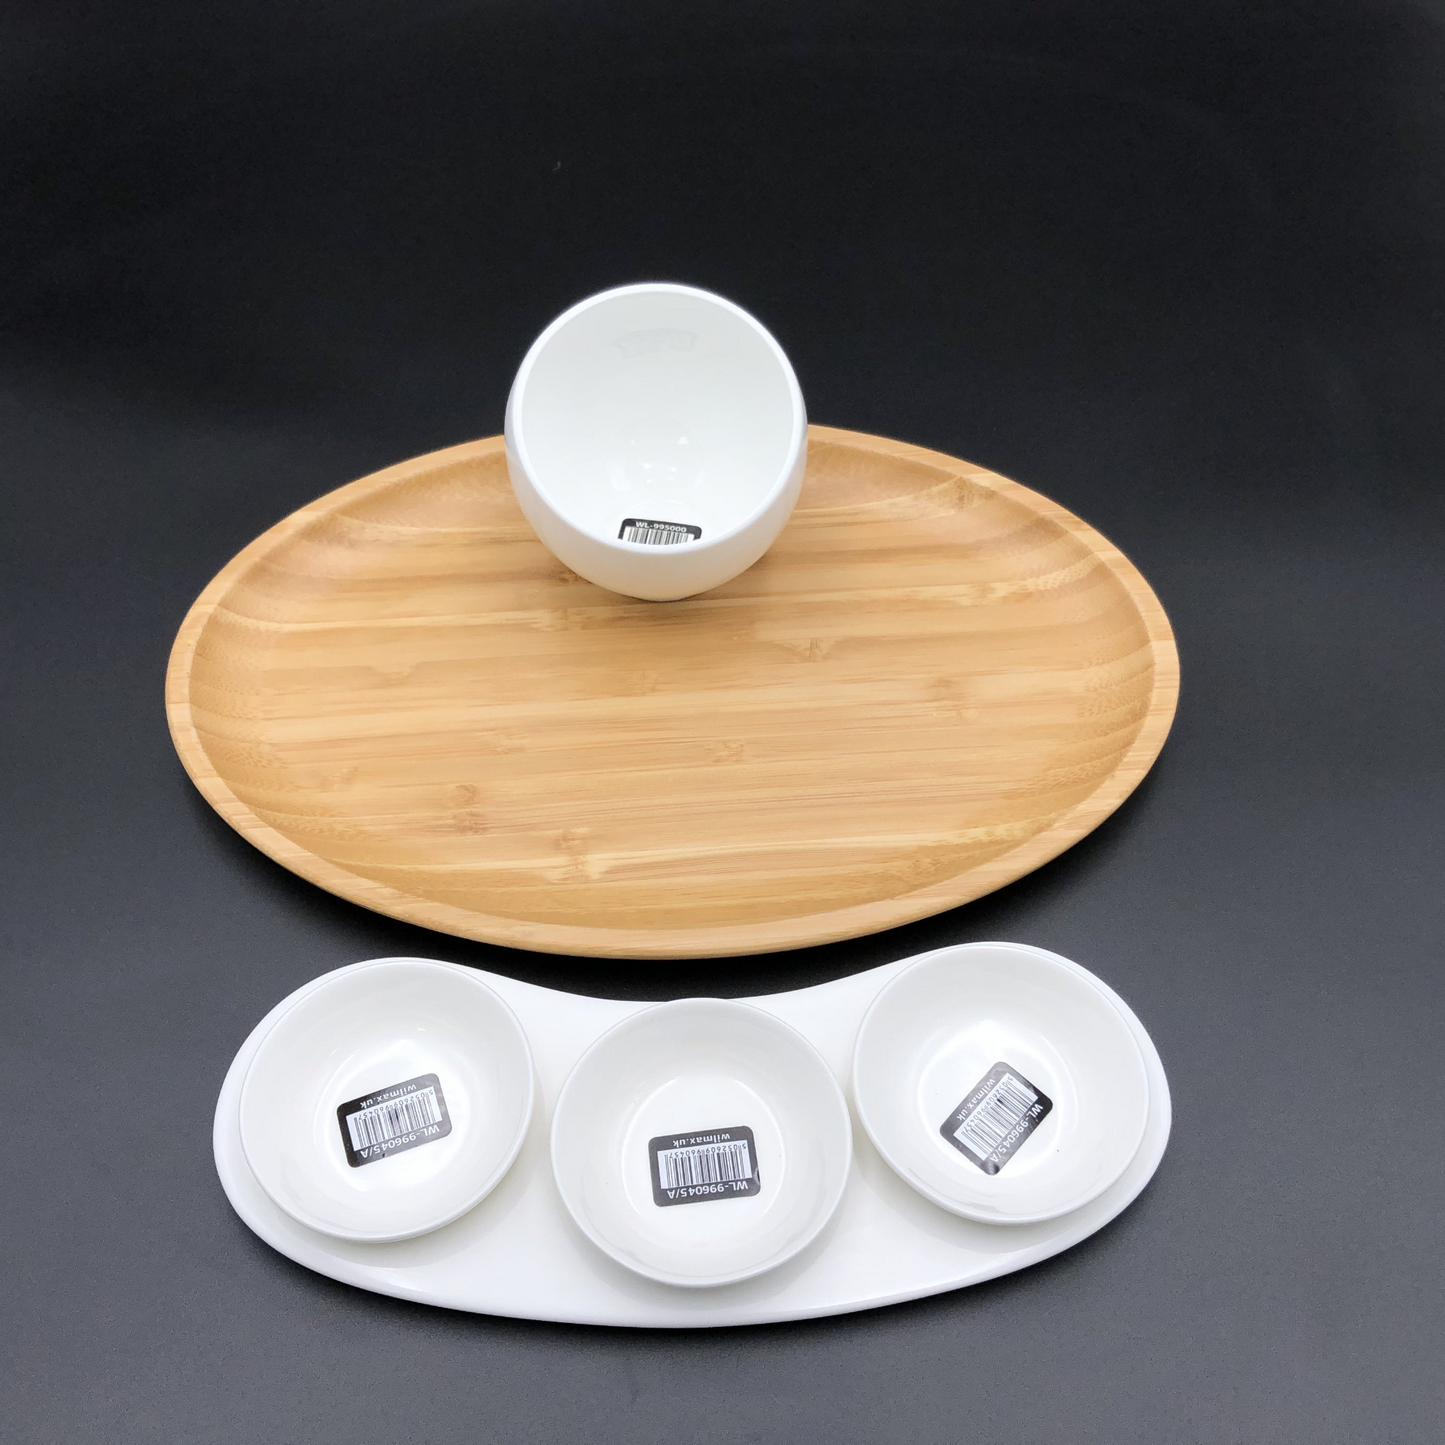 Wilmax Mignardises (Petit Four) Serving Set With Bamboo Oval Tray And Porcelain Dishes To Match WL-555023